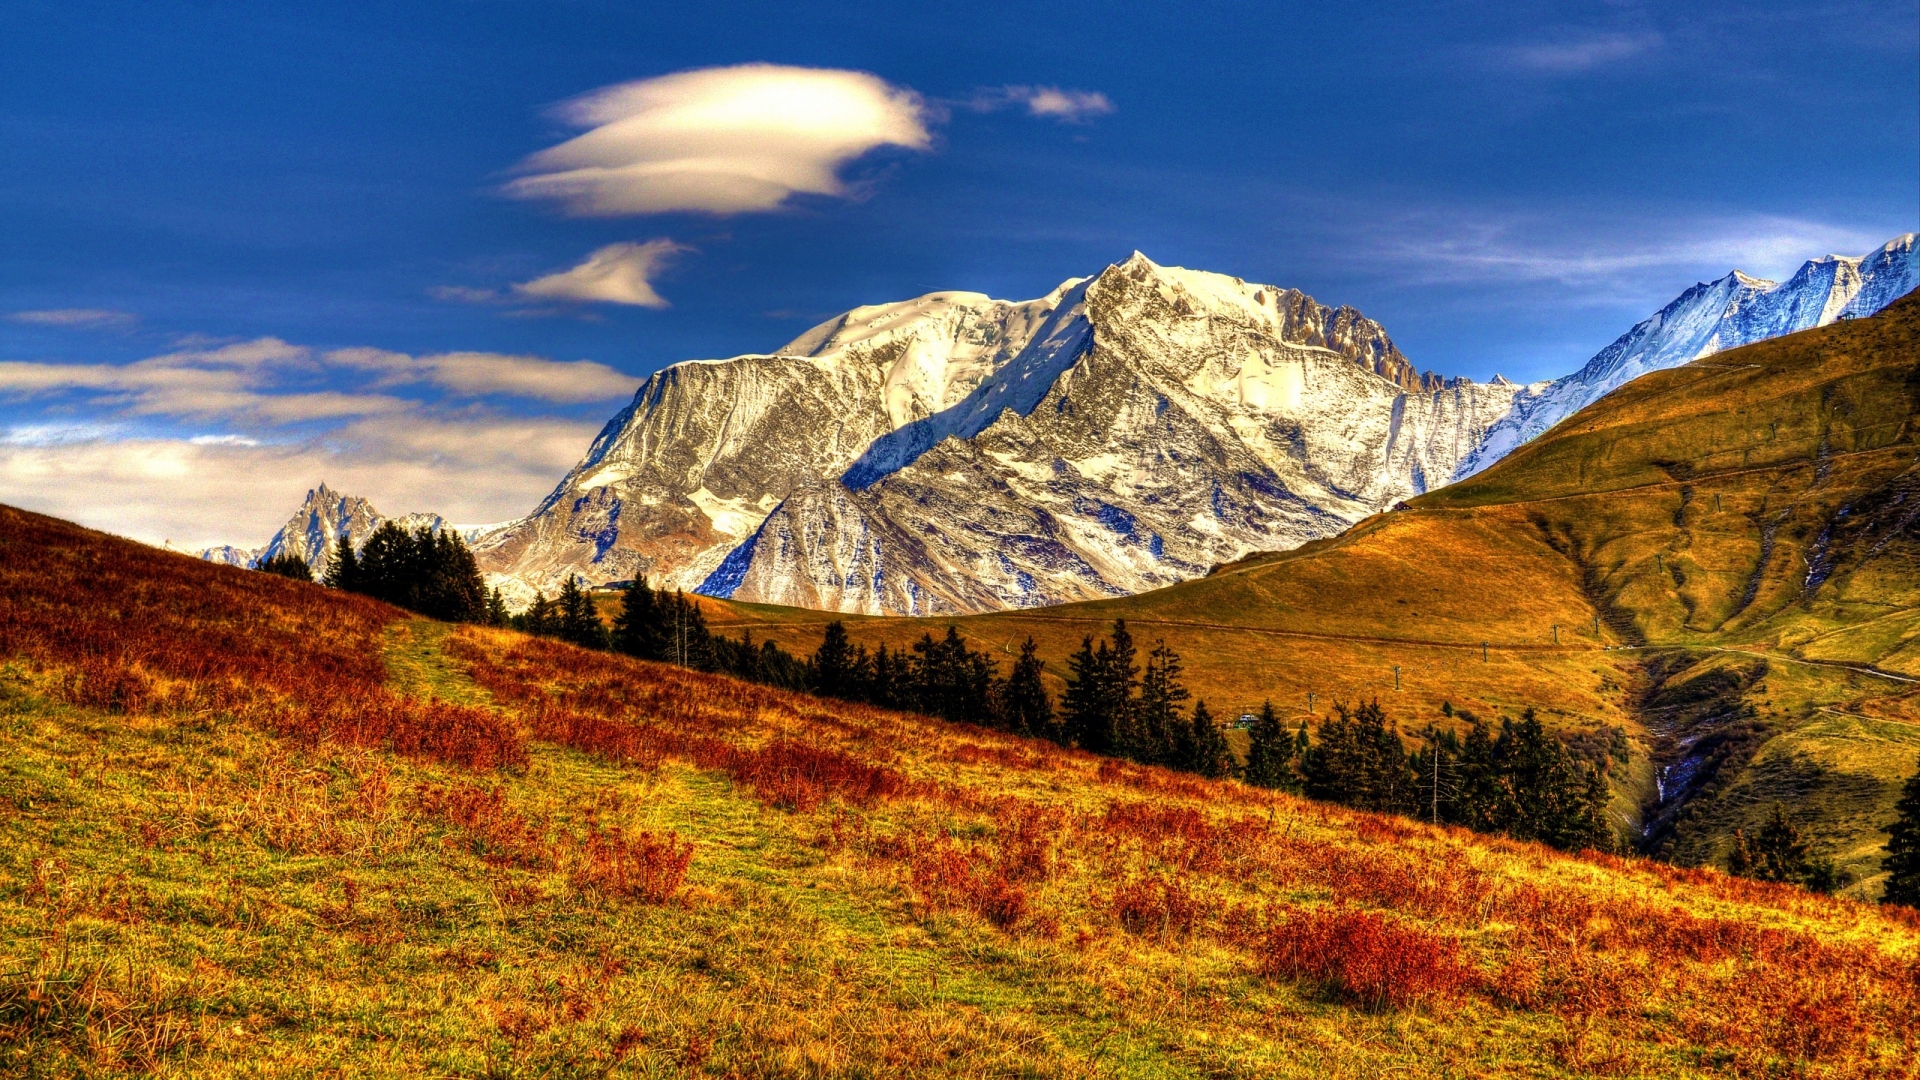 HDR Mountain Landscape for 1920 x 1080 HDTV 1080p resolution